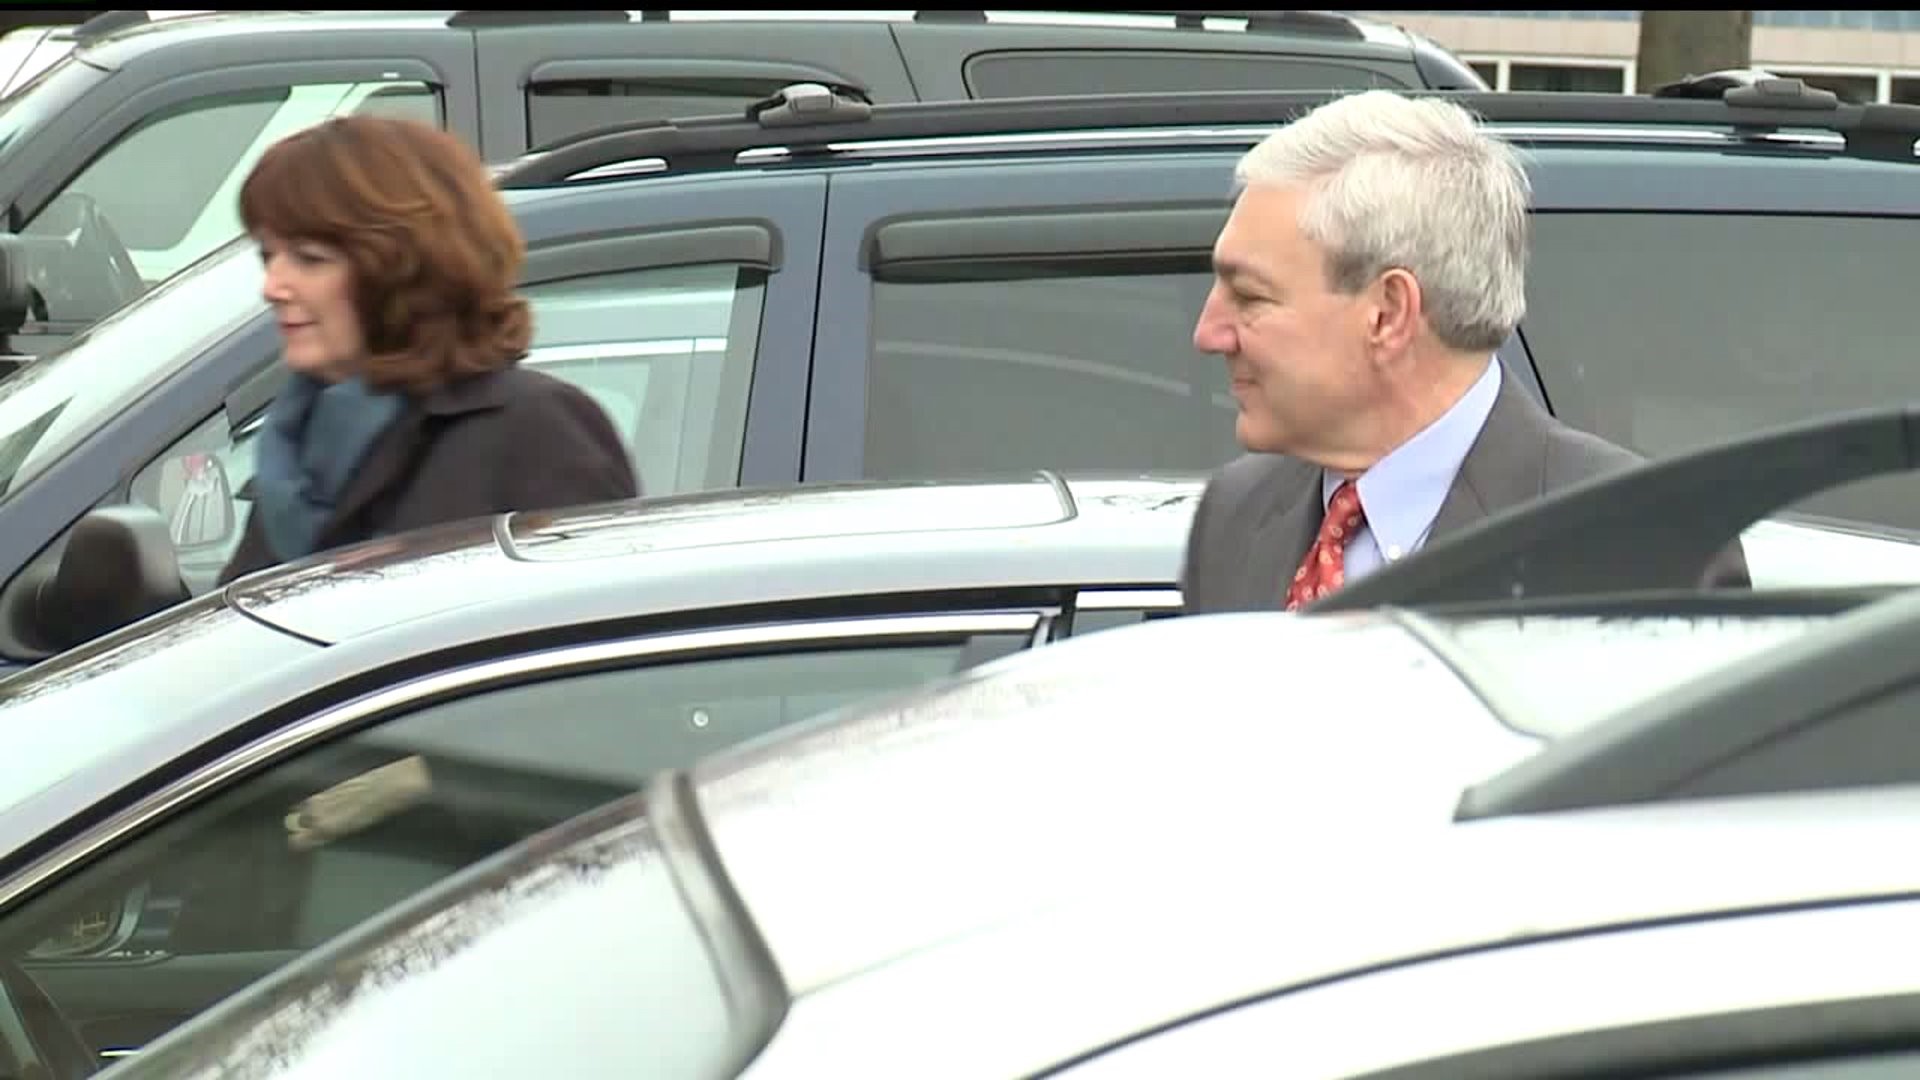 The trial for former Penn State University president Graham Spanier is set to begin today at the Dauphin County Courthouse